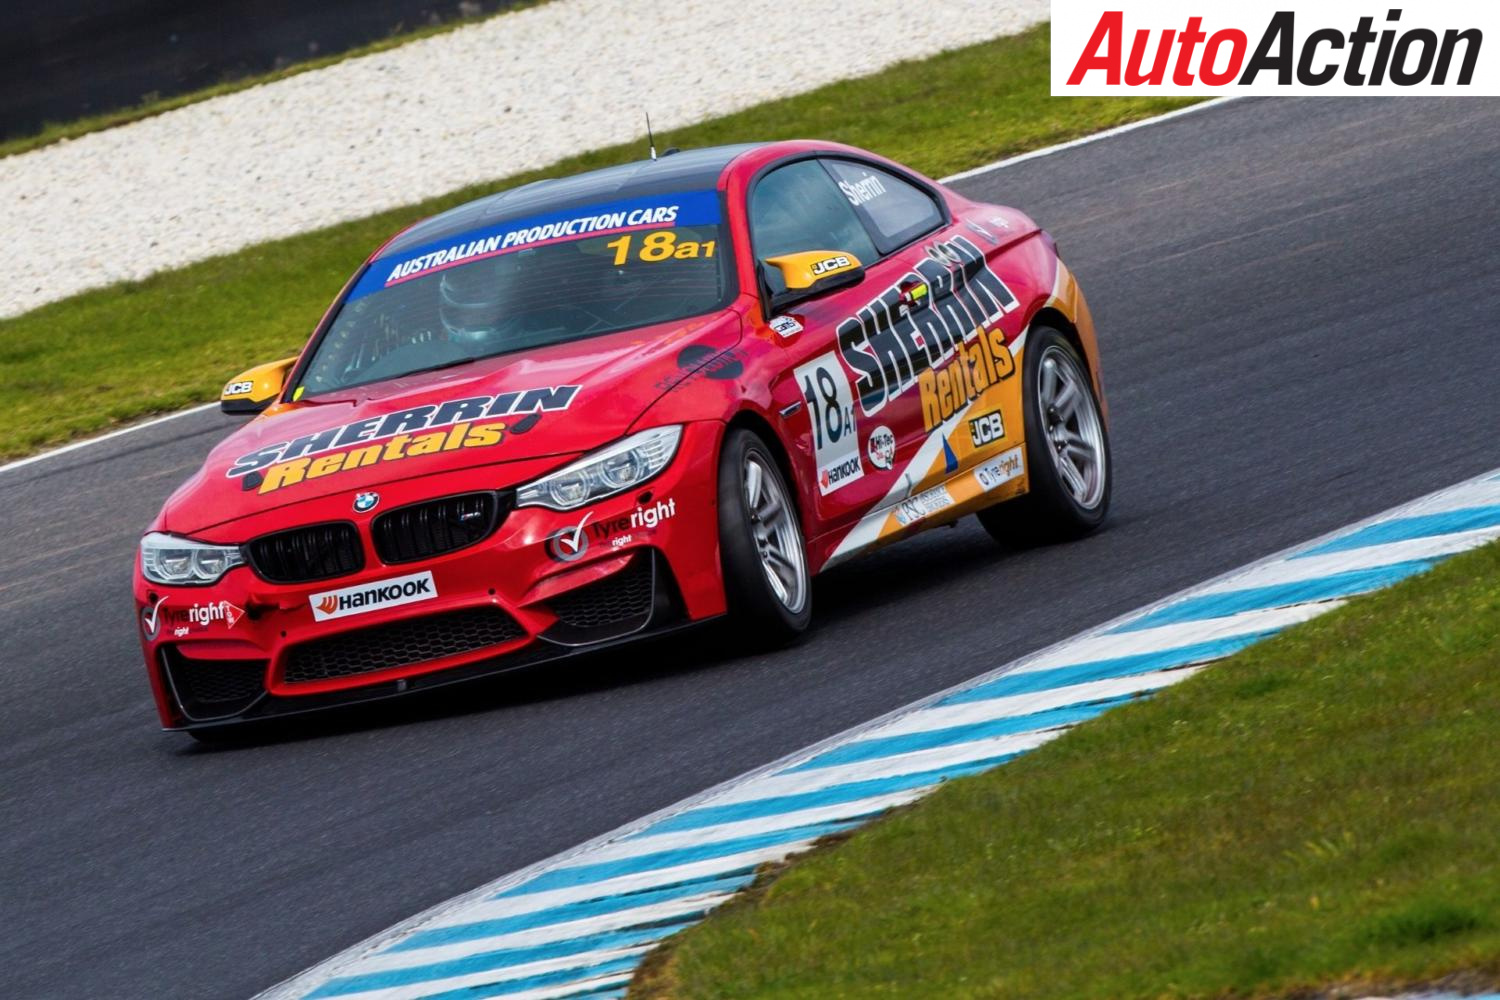 Shannons Nationals headlined by a 4 hour Australian Production Car race - Photo: Dirk Klynsmith